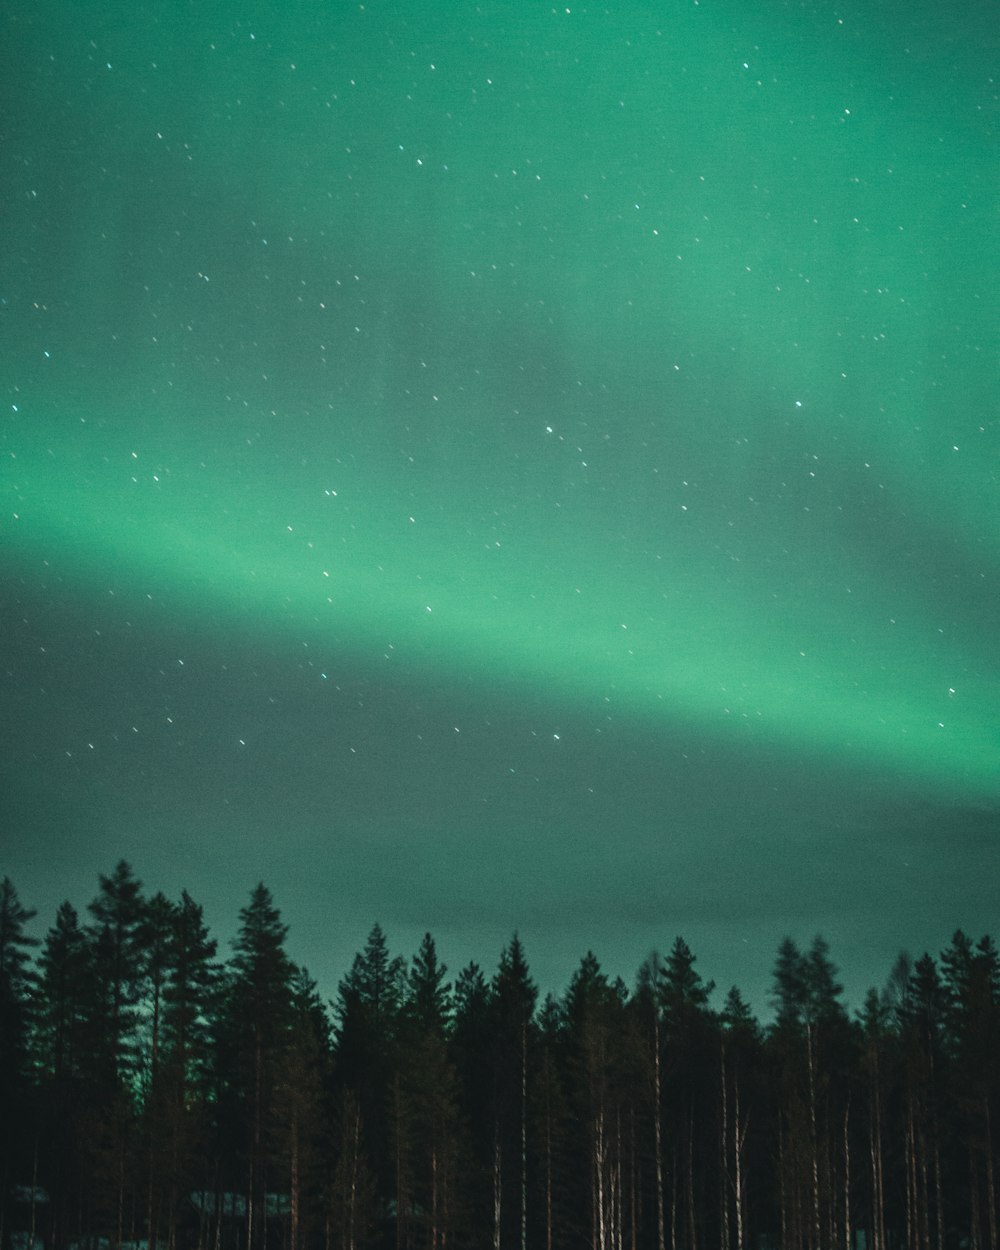 a green aurora bore in the sky over a forest